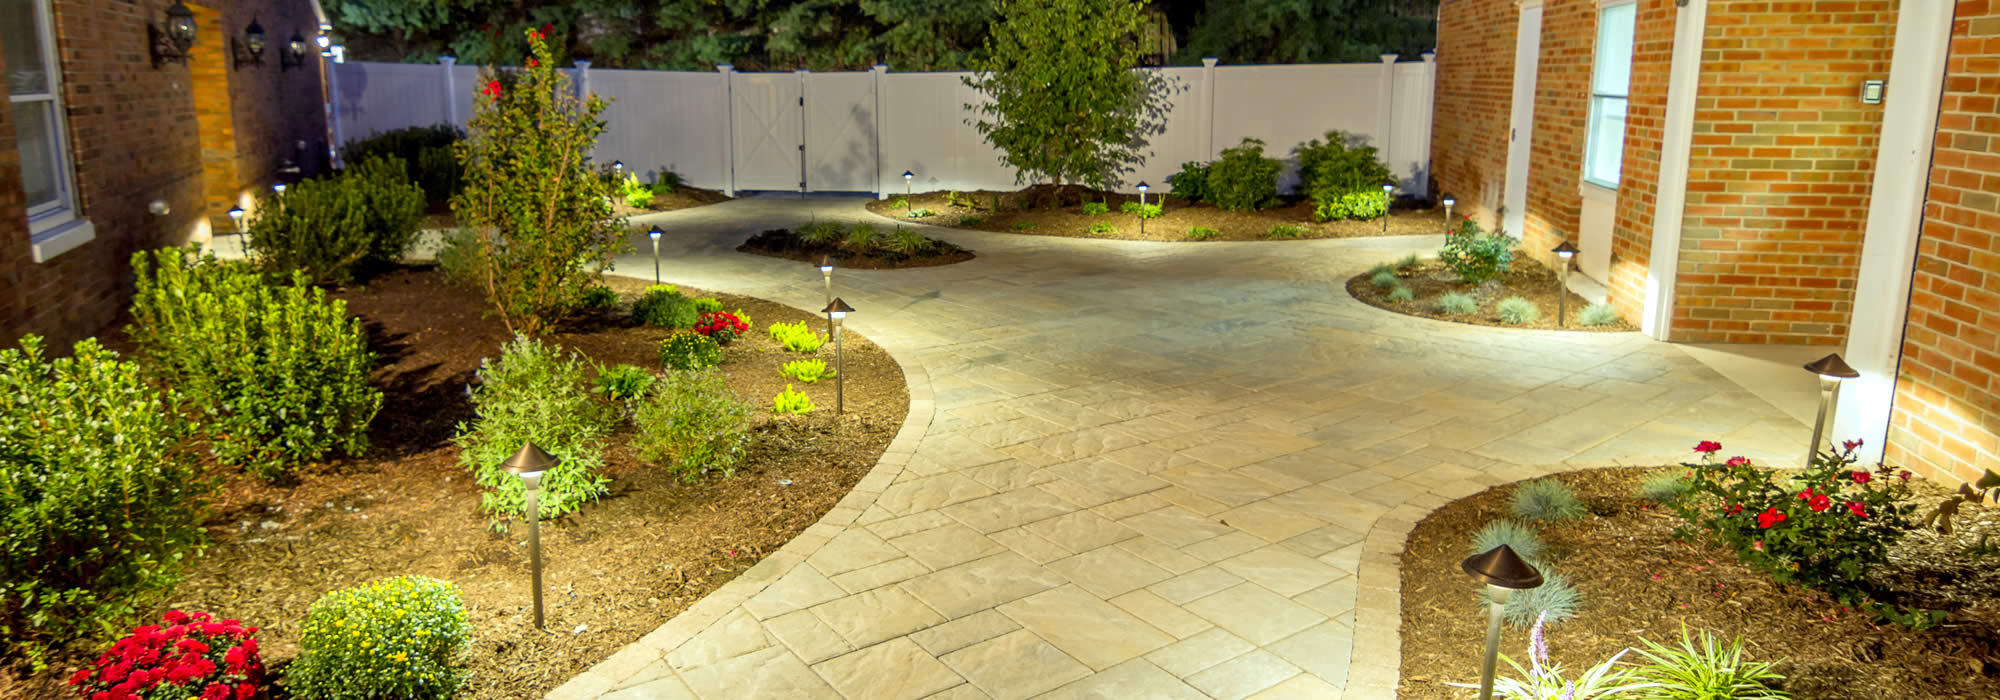 Landscaping Services in Middleton